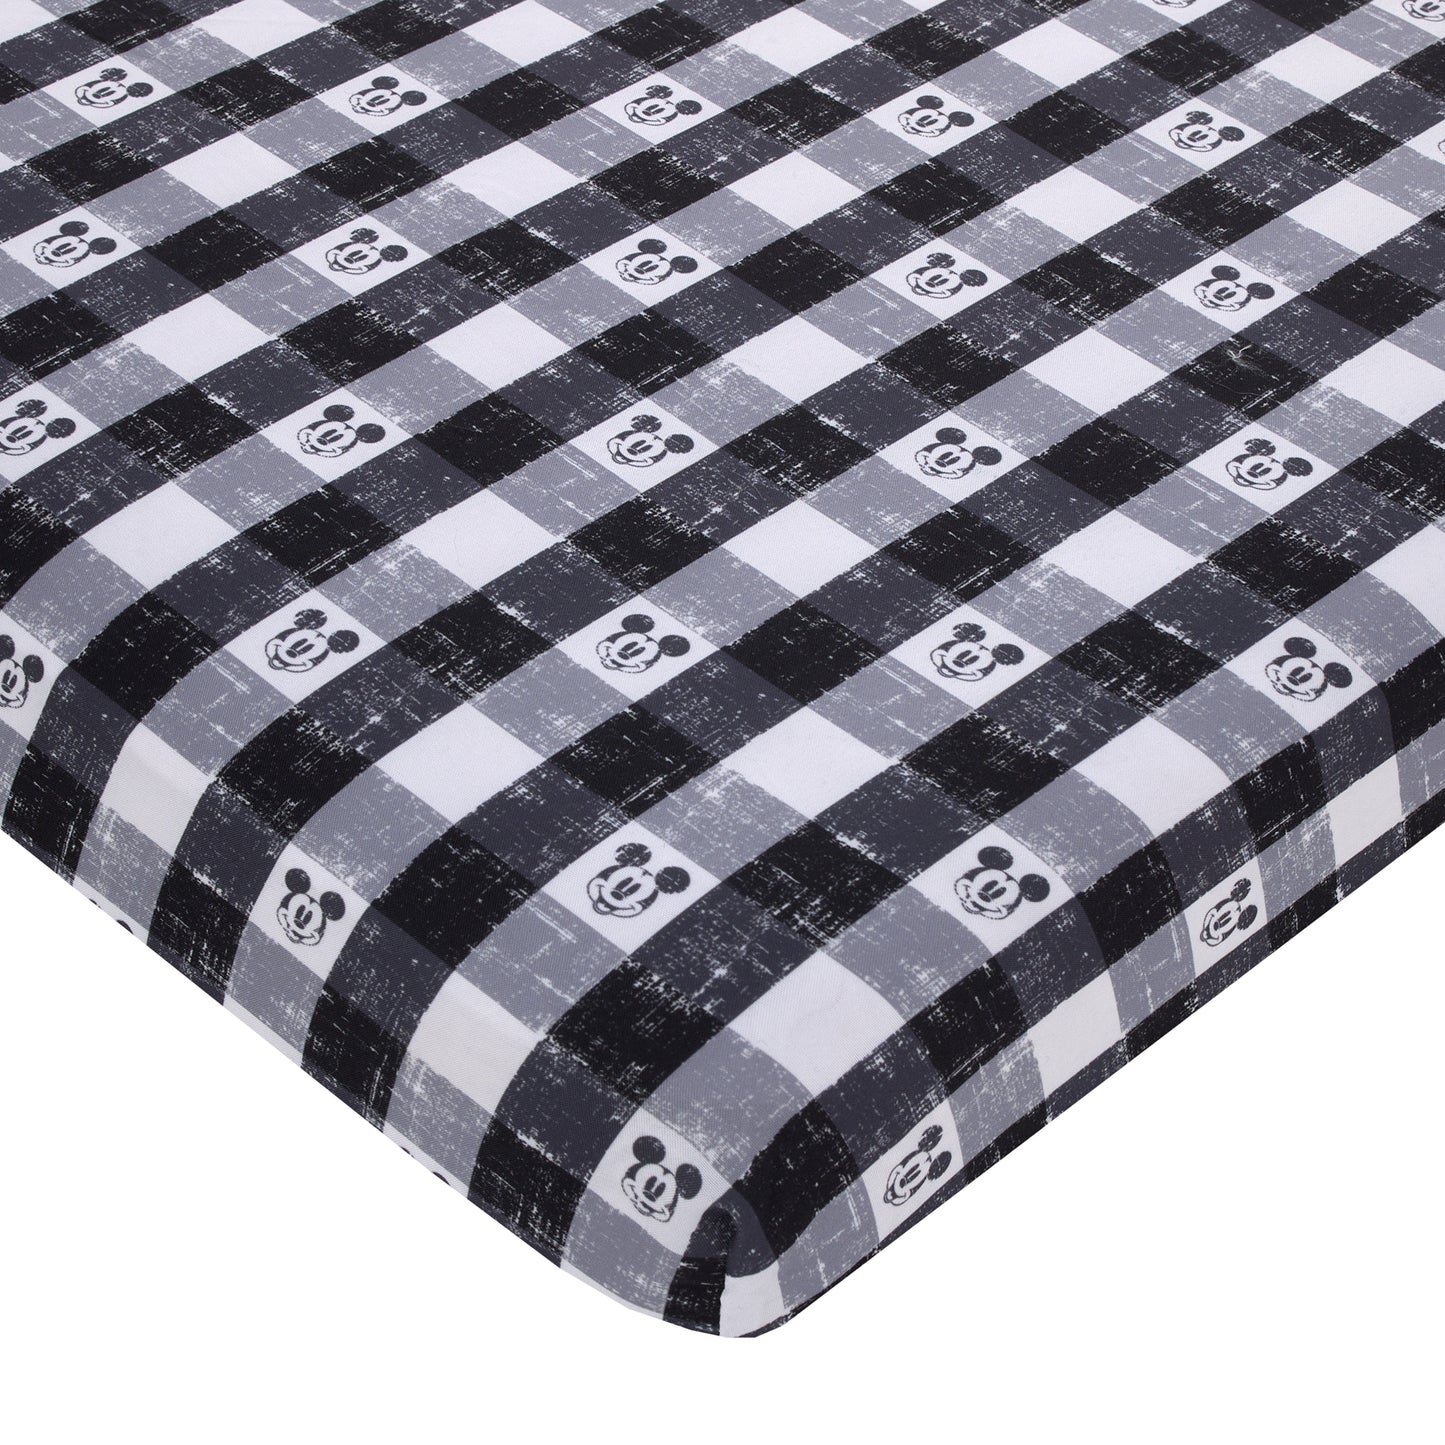 Disney Mickey Mouse - Black, White and Gray Plaid Nursery Fitted Mini Crib Sheet